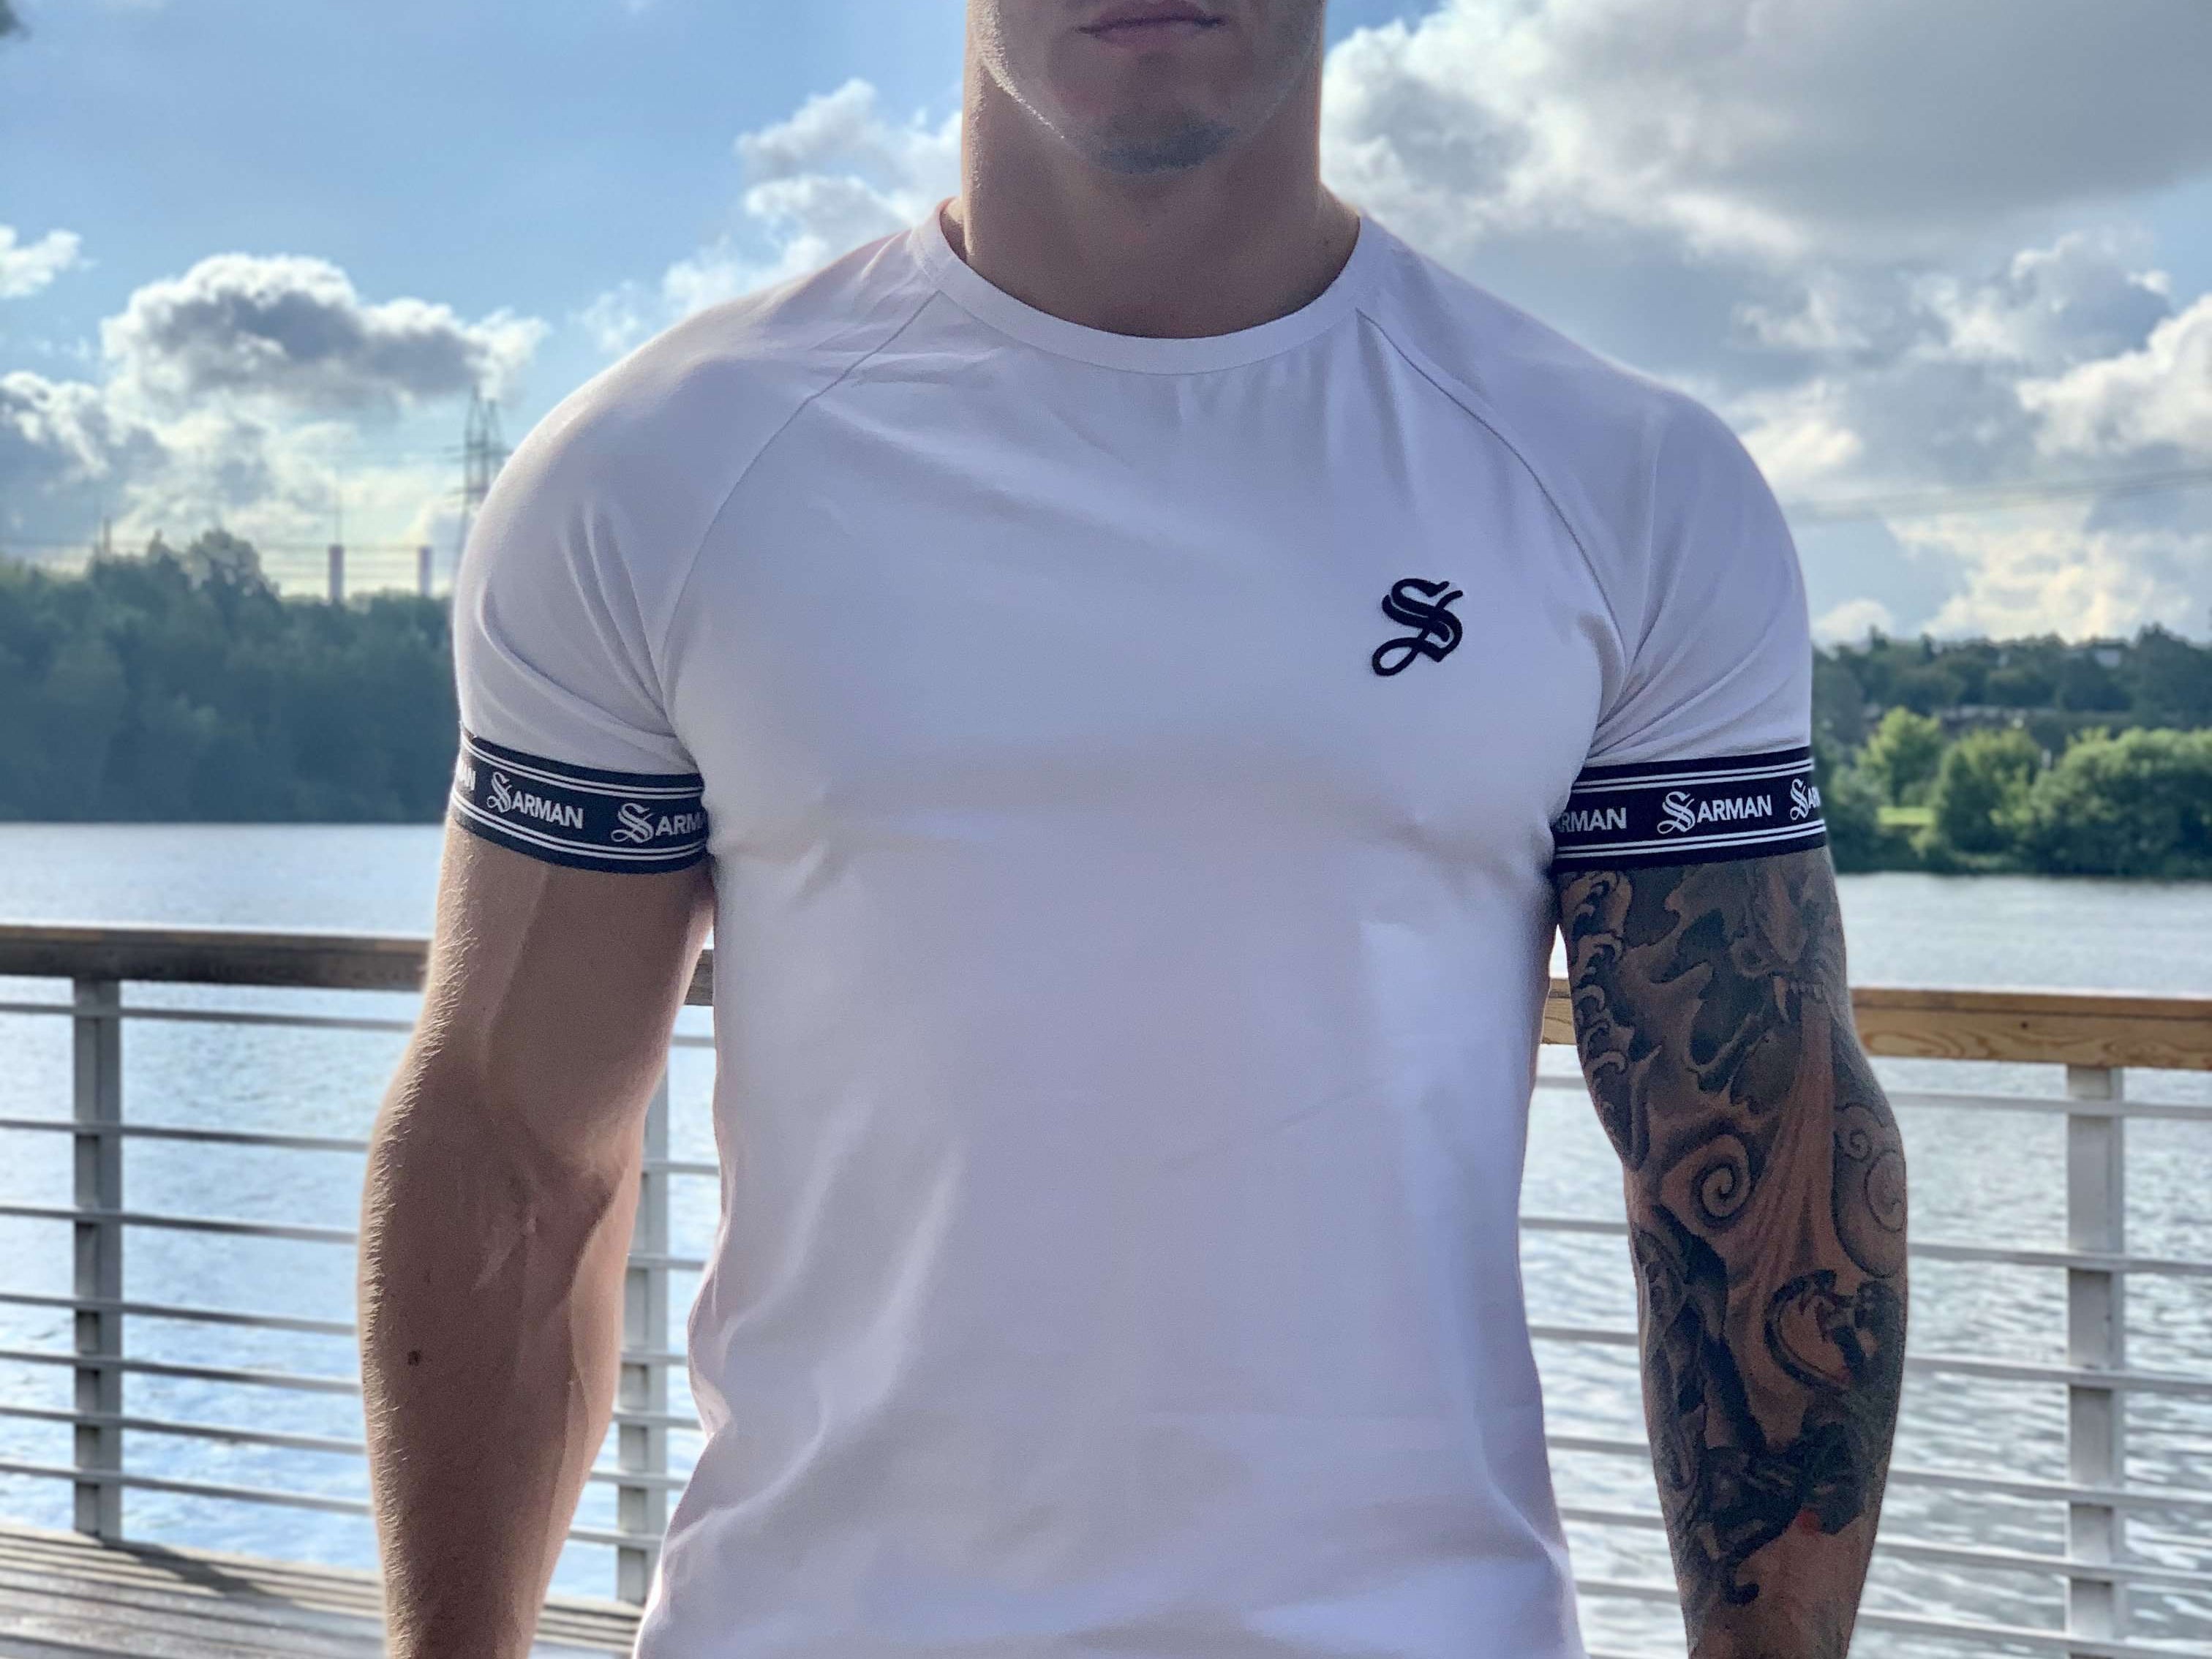 Epitome - White T-shirt for Men (PRE-ORDER DISPATCH DATE 25 SEPTEMBER) - Sarman Fashion - Wholesale Clothing Fashion Brand for Men from Canada